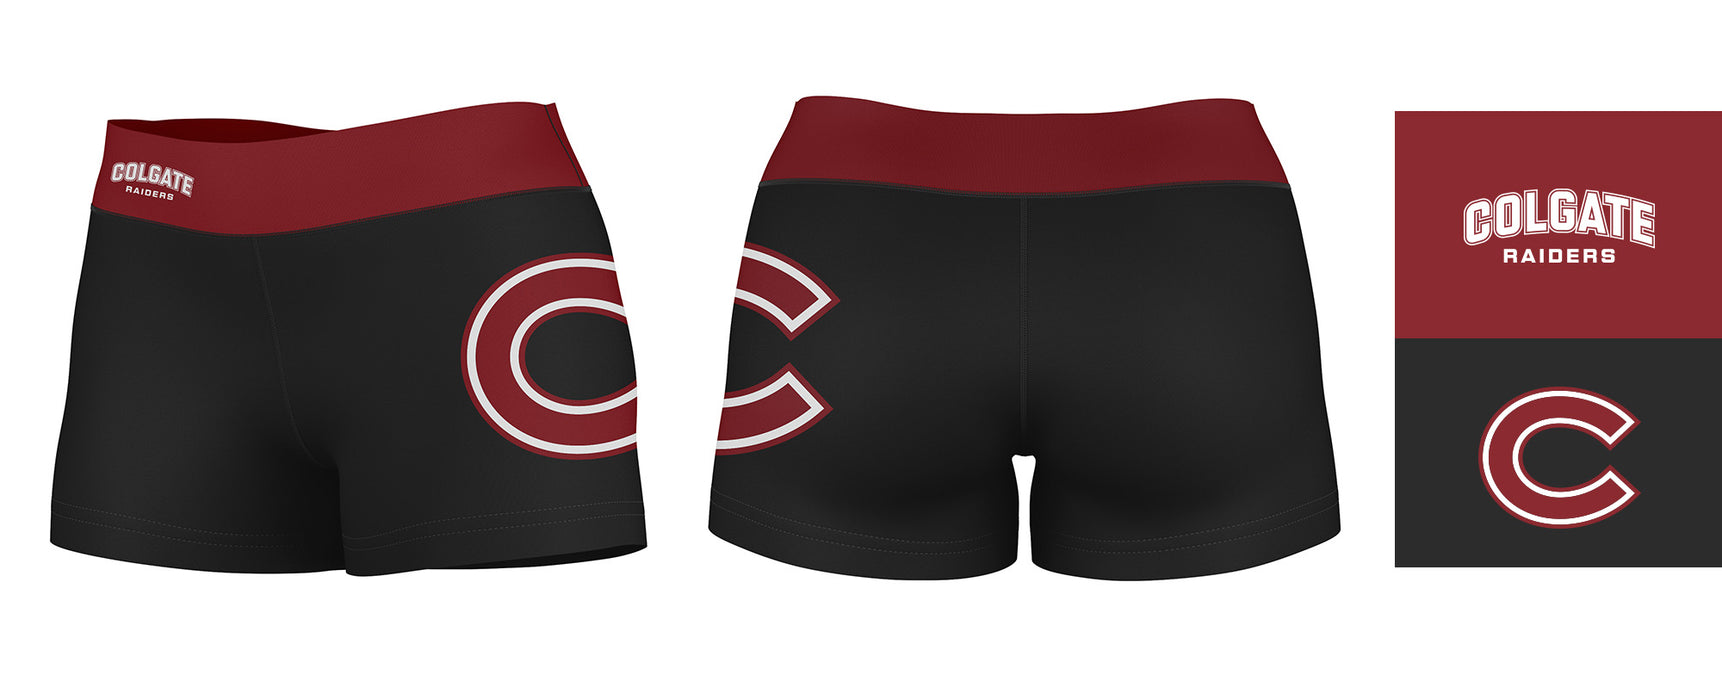 Colgate Raiders Vive La Fete Logo on Thigh and Waistband Black and Maroon Women Yoga Booty Workout Shorts 3.75 Inseam" - Vive La Fête - Online Apparel Store